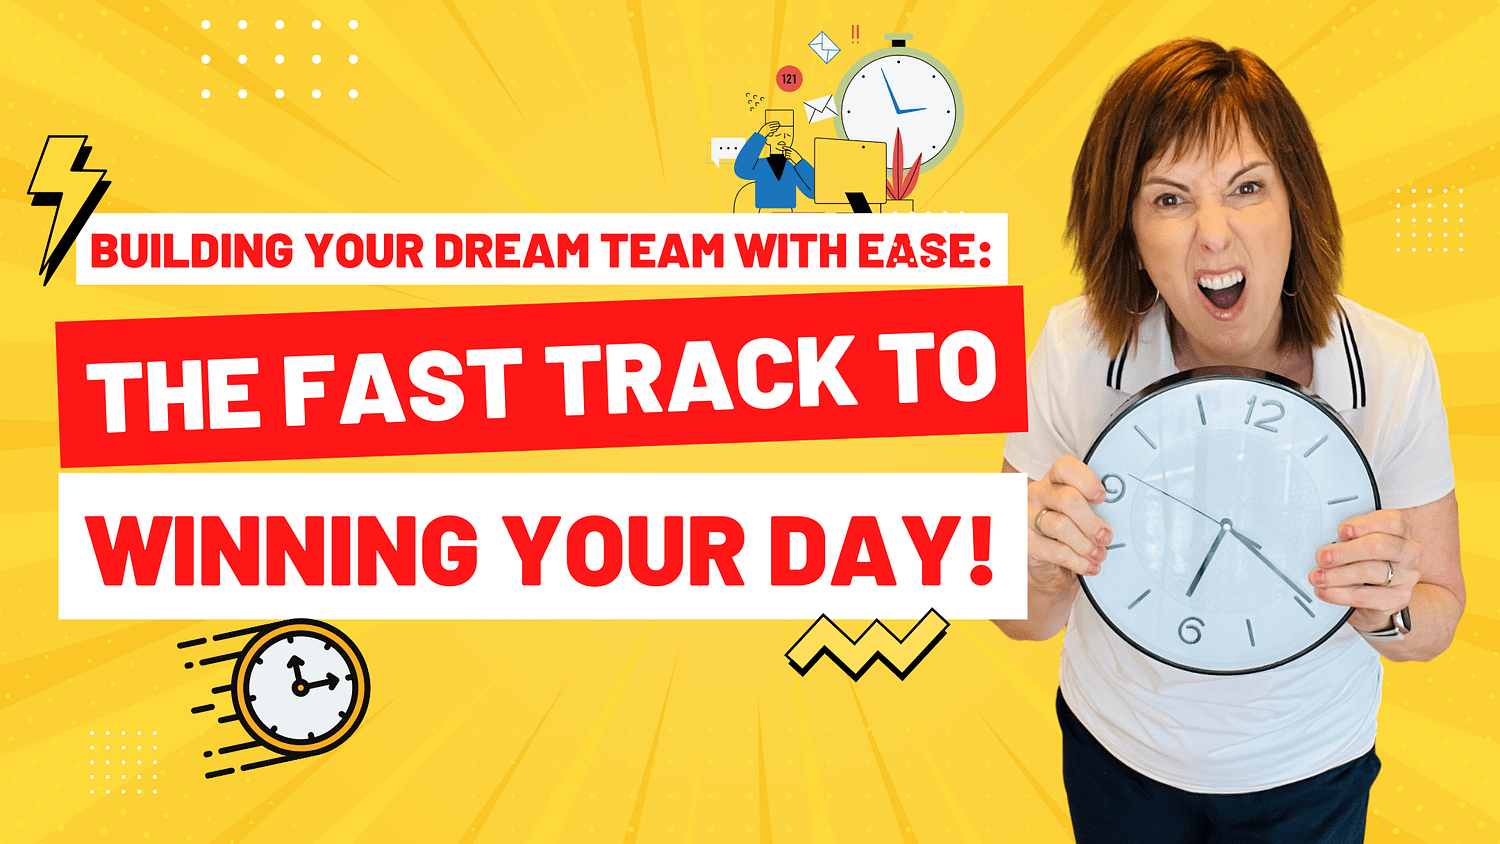 Building Your Dream Team with Ease: The Fast Track to Winning Your Day!